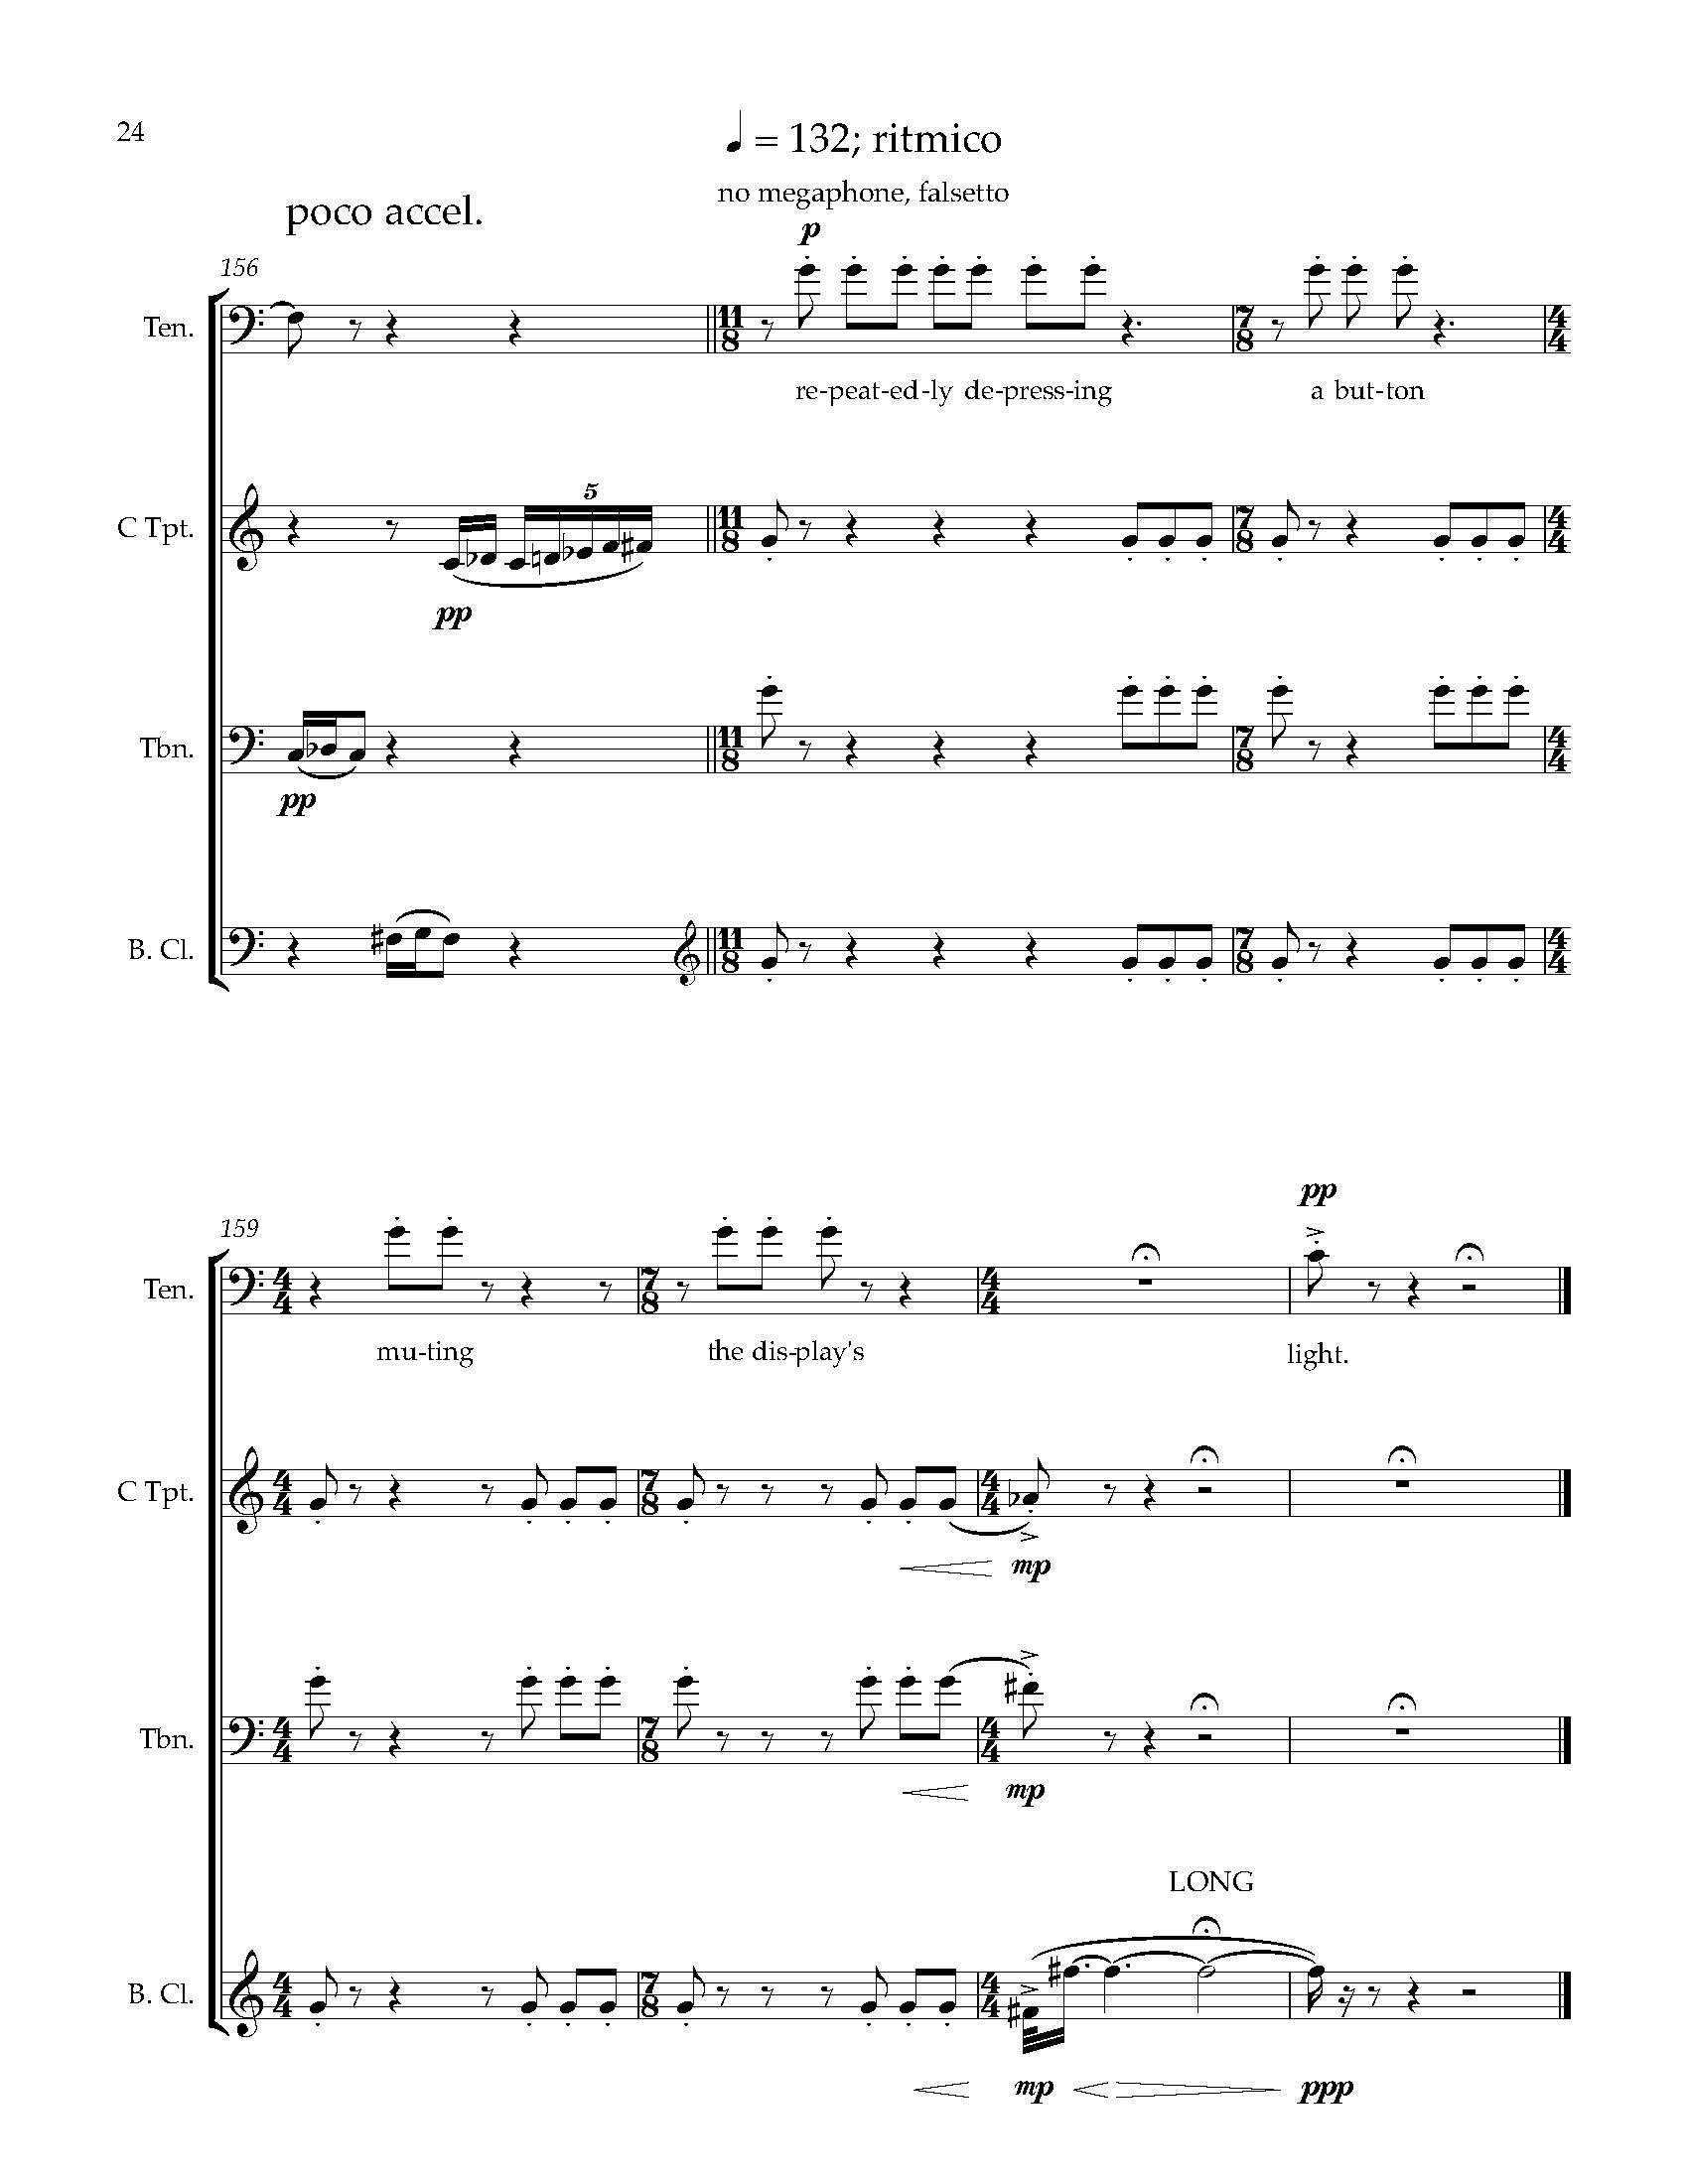 Many Worlds [1] - Complete Score_Page_33.jpg